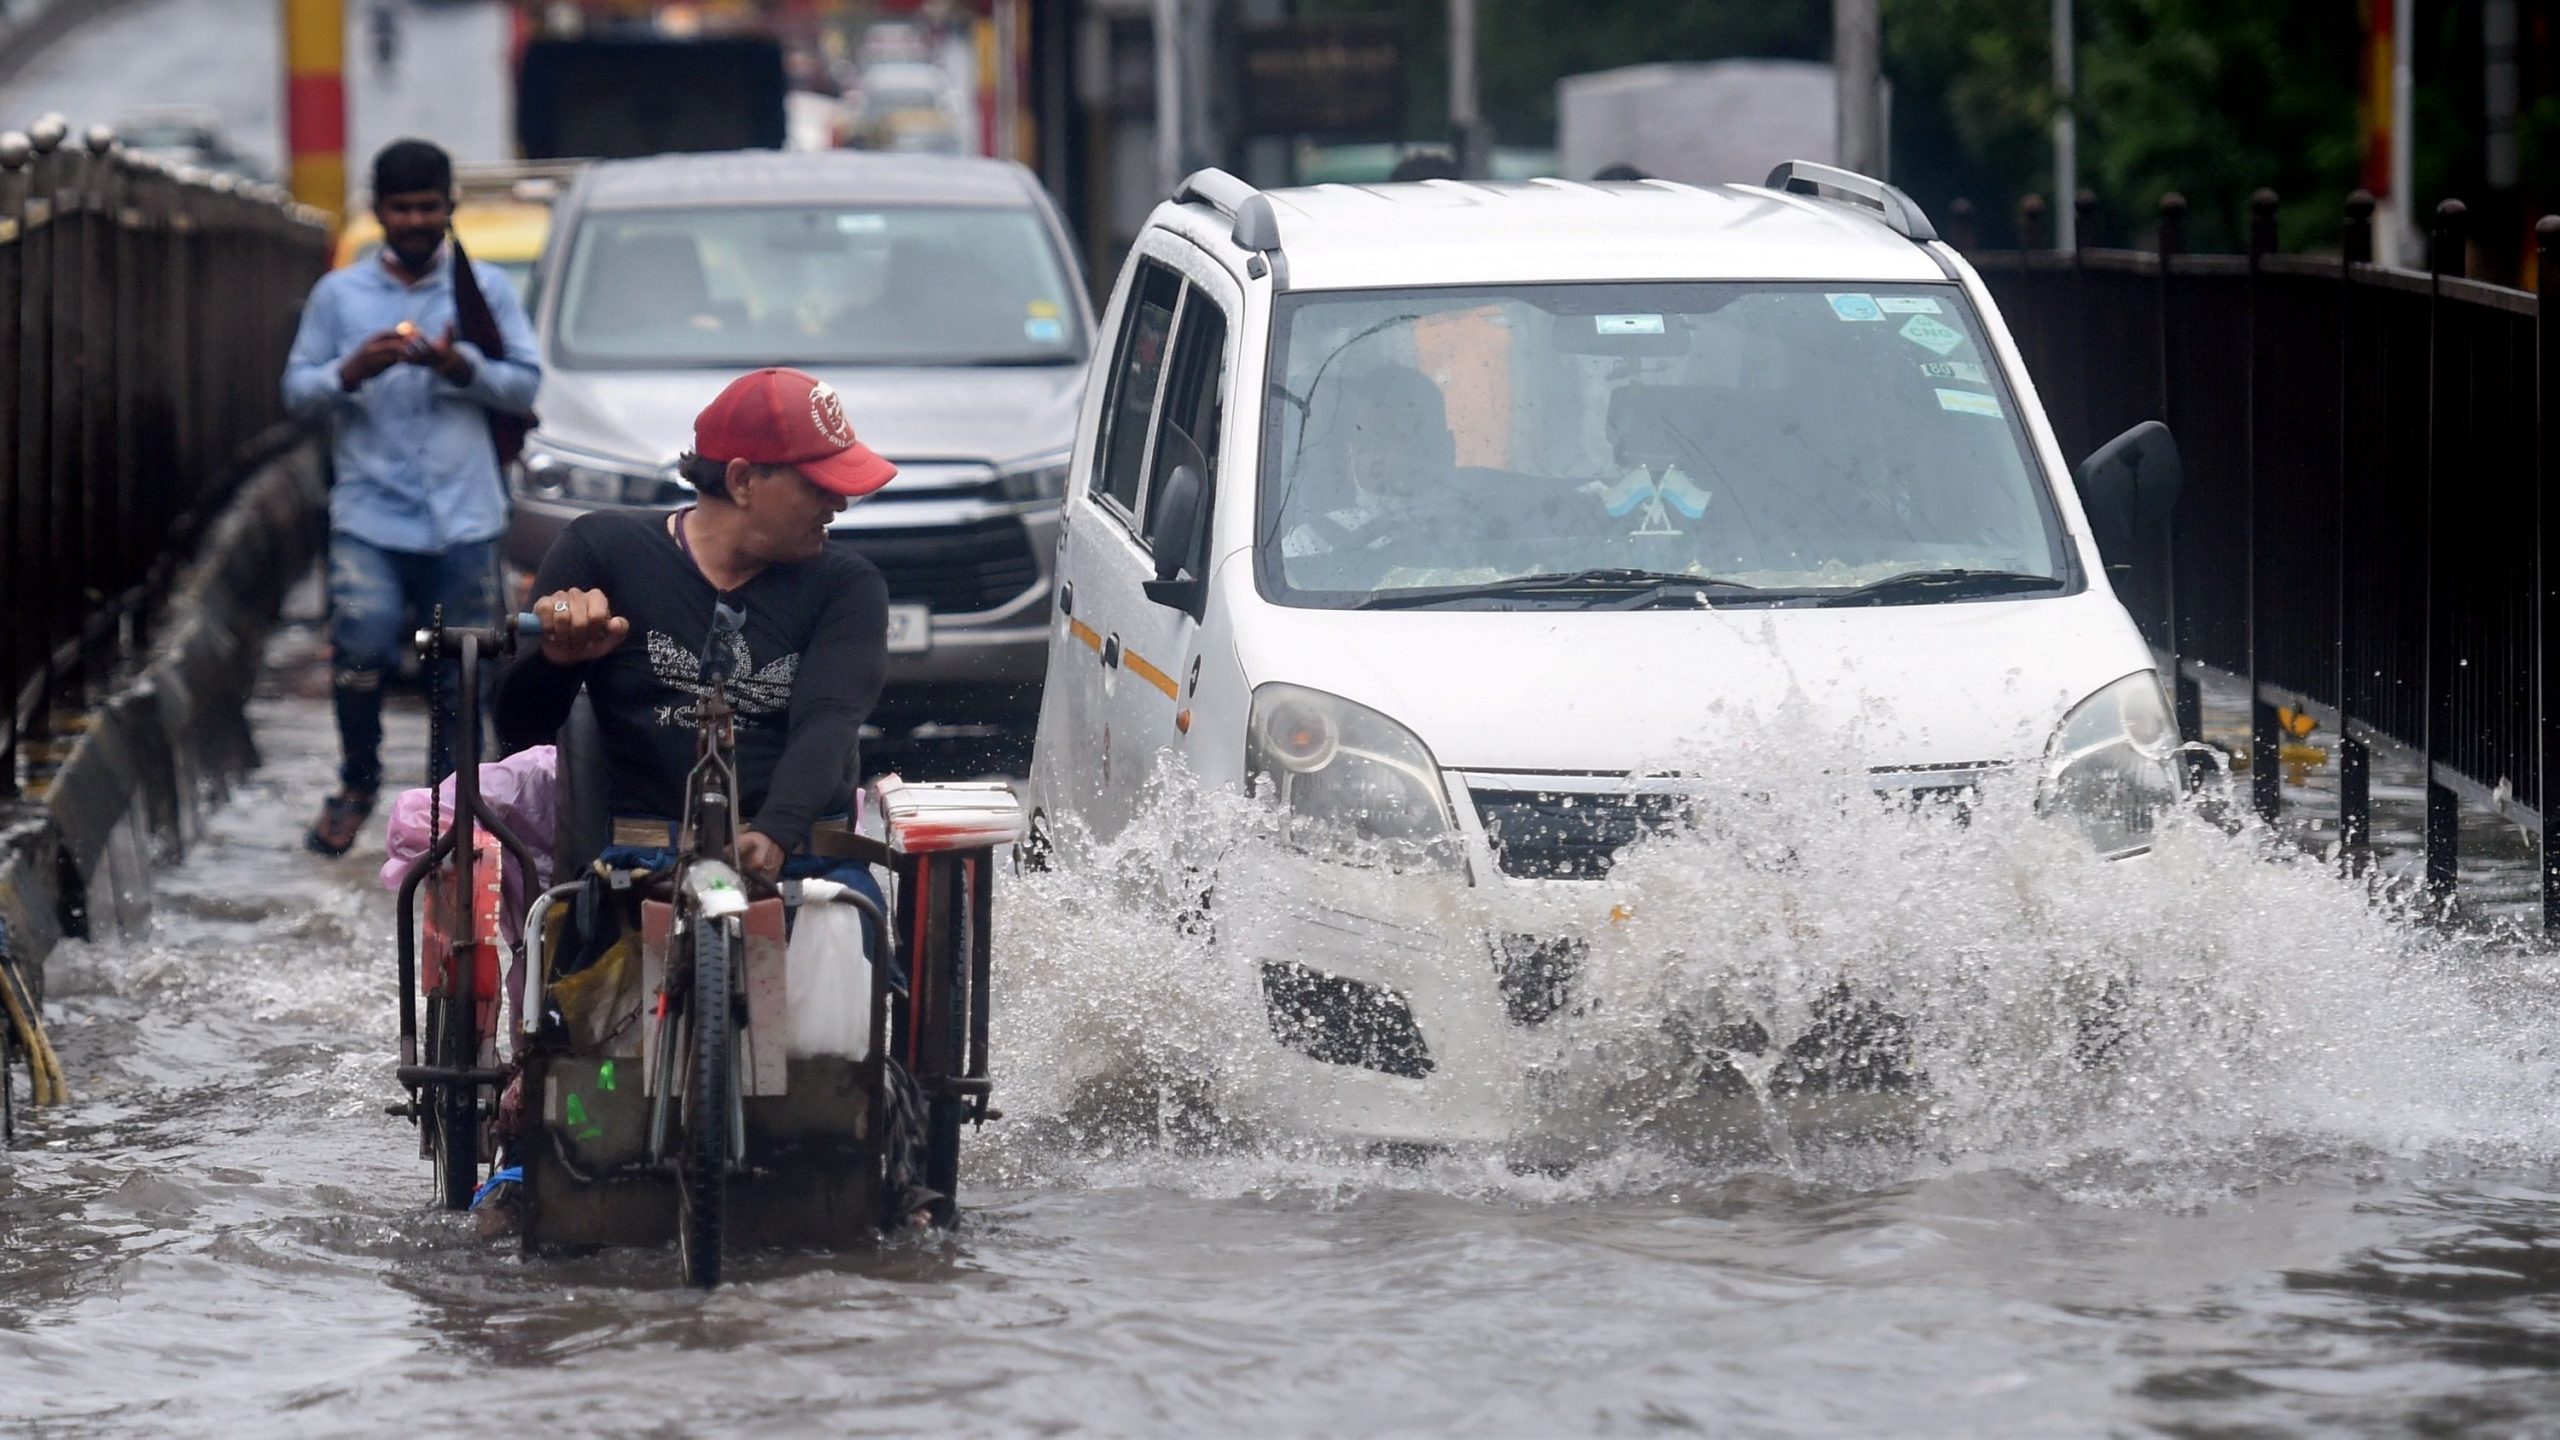 Mumbai waterlogged as city sees second highest 24-hr rain in a decade. Watch